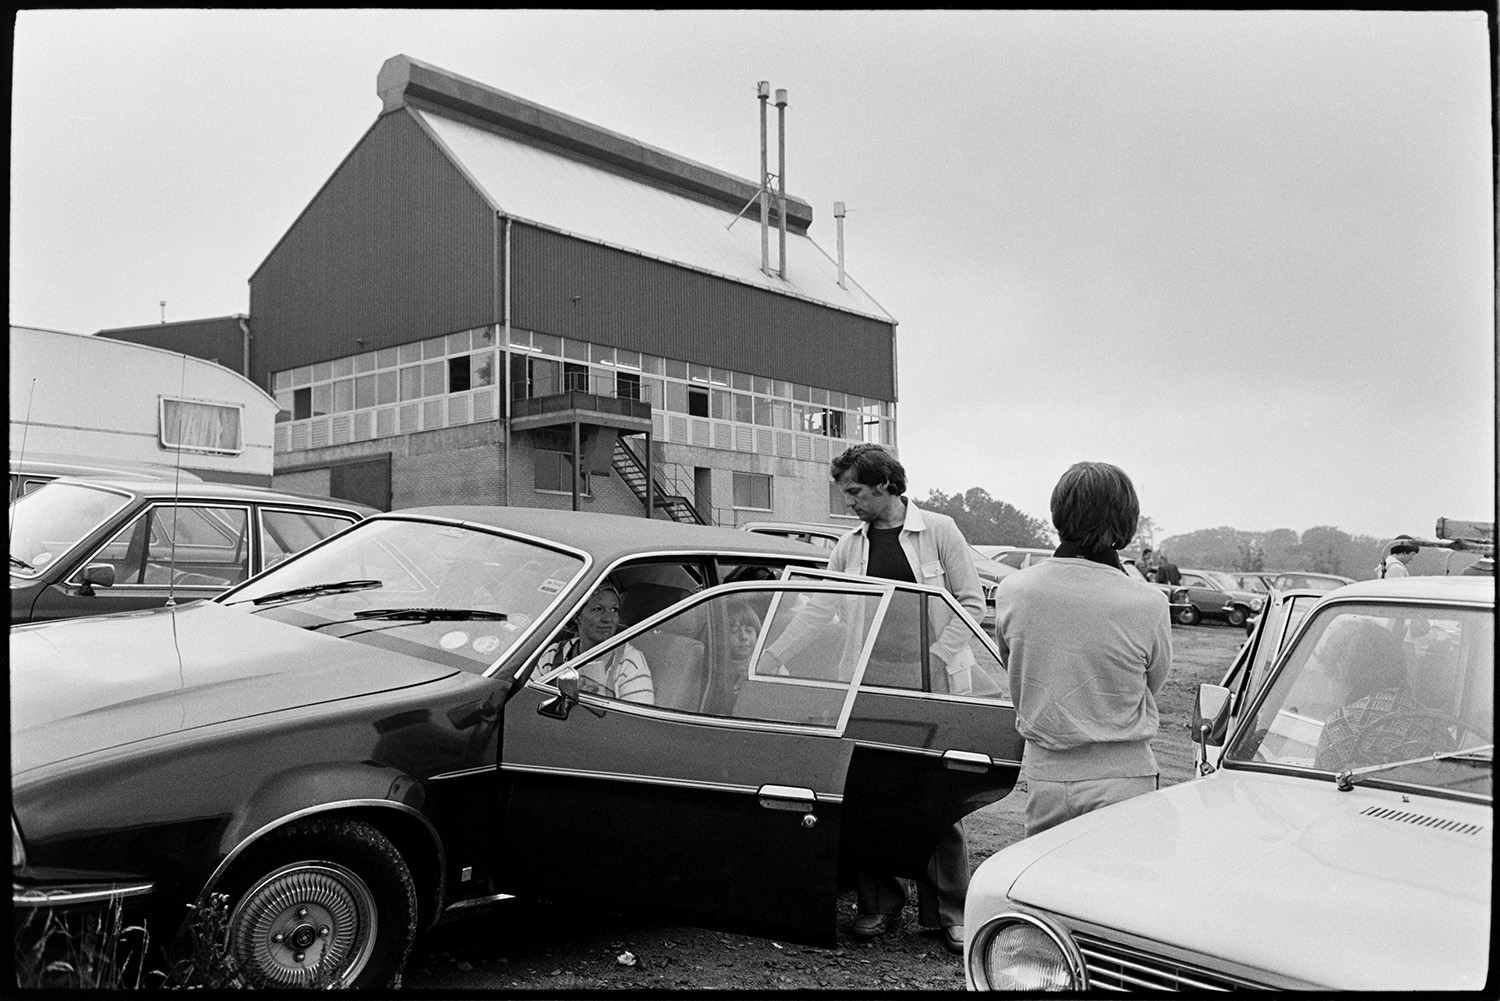 Management and workers at glass factory. 
[Visitors to the Dartington Glass factory, also known as Dartington Crystal, in Torrington, by their parked car in the car park. The factory building is visible in the background.]